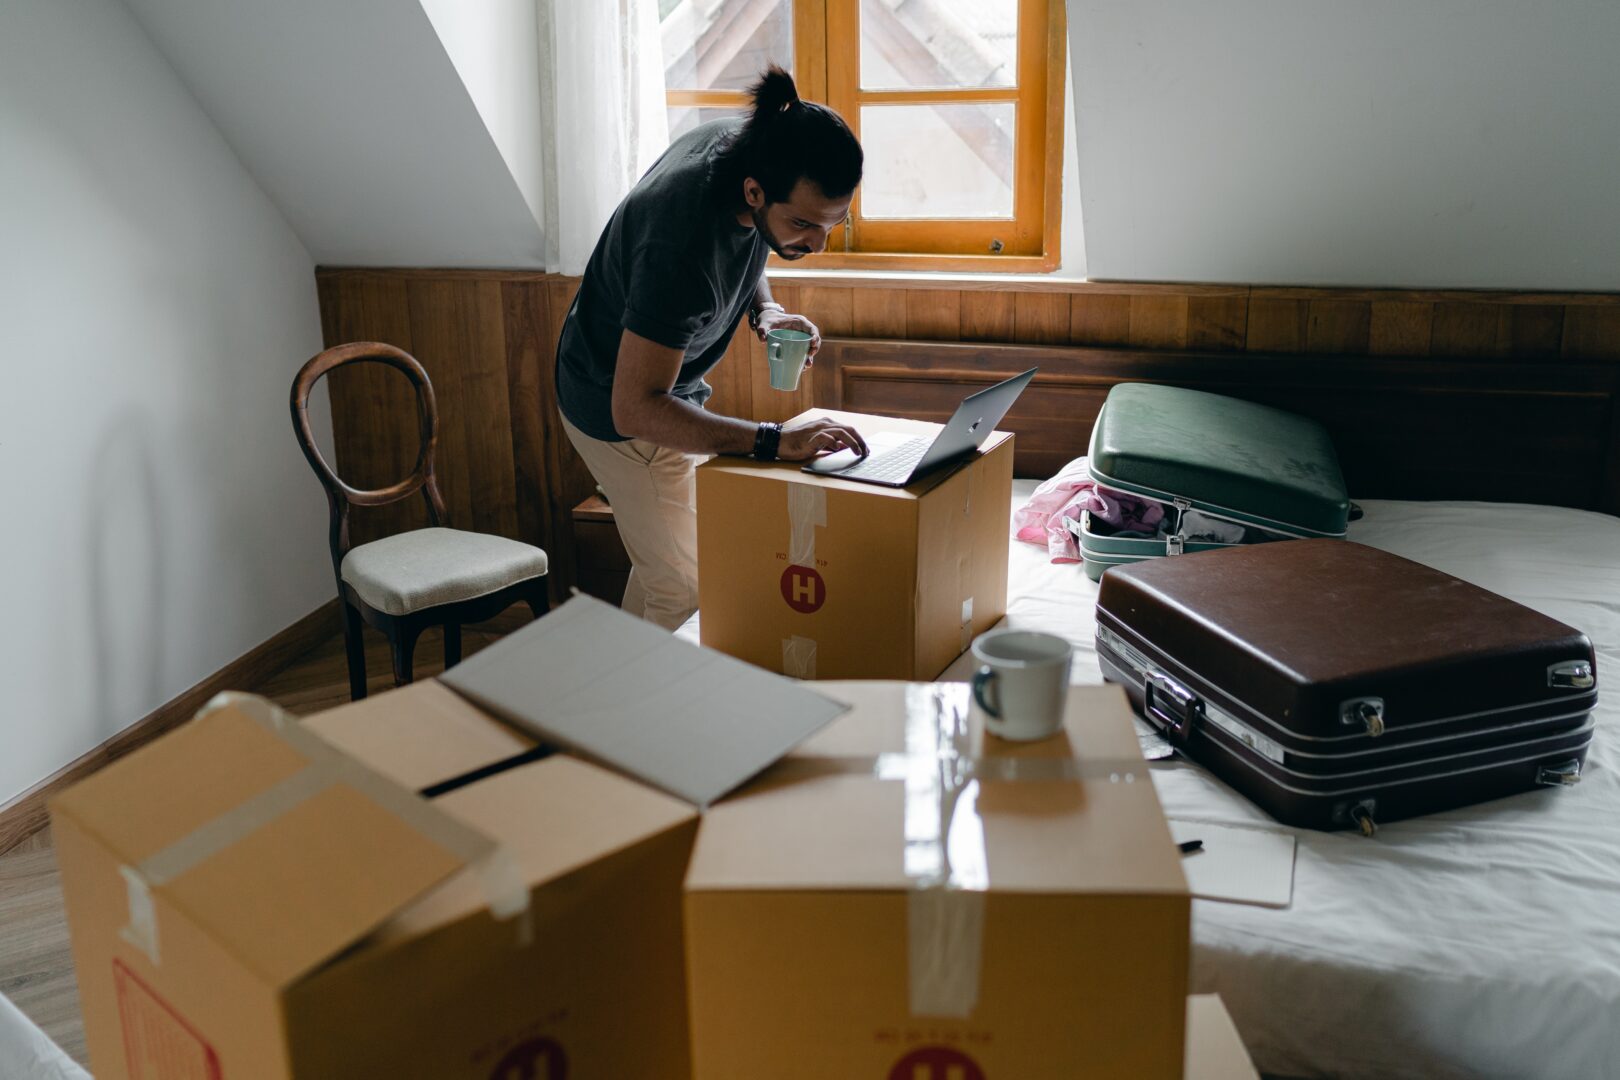 Man in a room packing boxes - division of assets